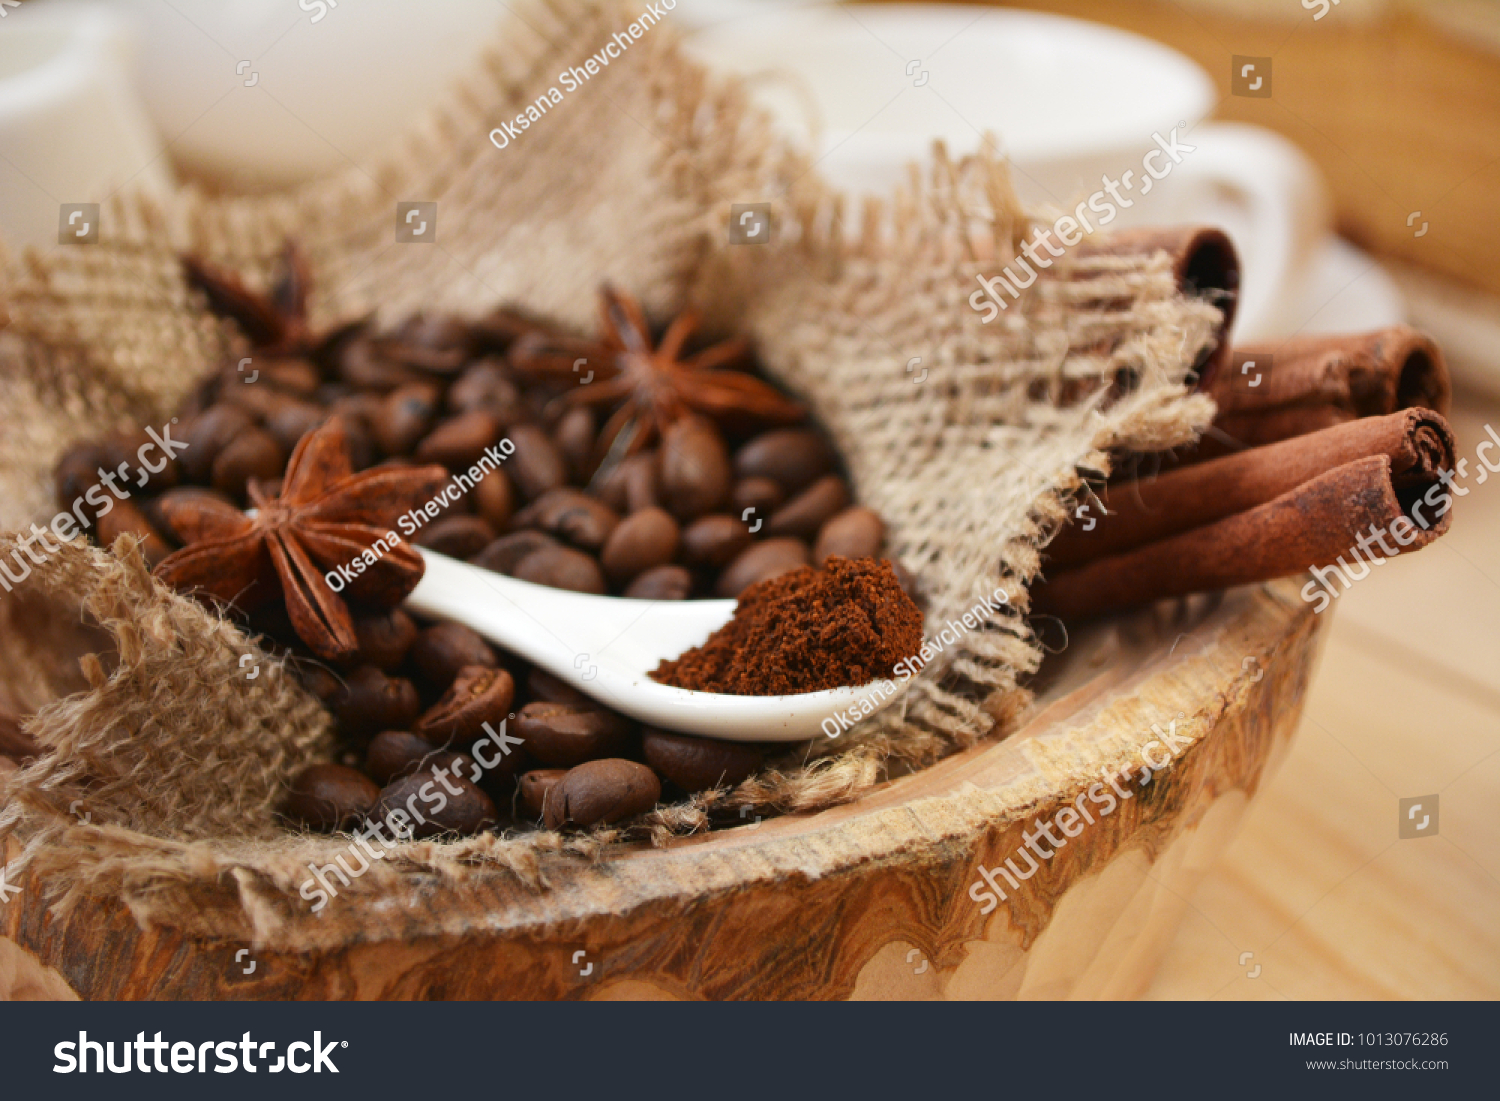 grated coffee in white porcelain spoon on blurred  roasted coffee beans background. aroma coffee ingredients. selective focus. #1013076286